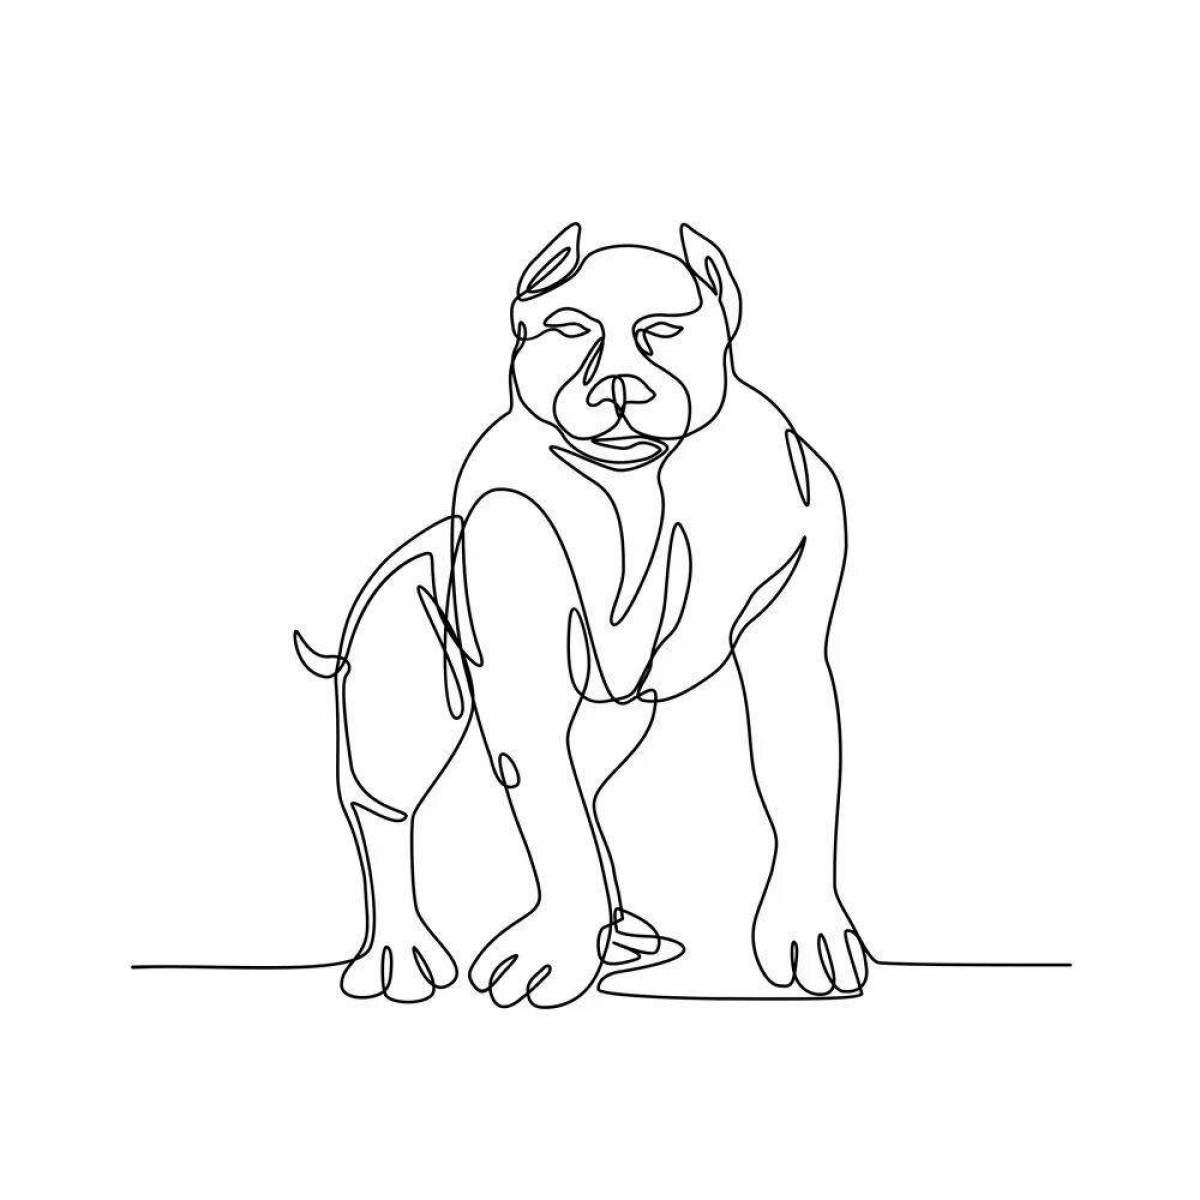 Coloring page elegant american bully